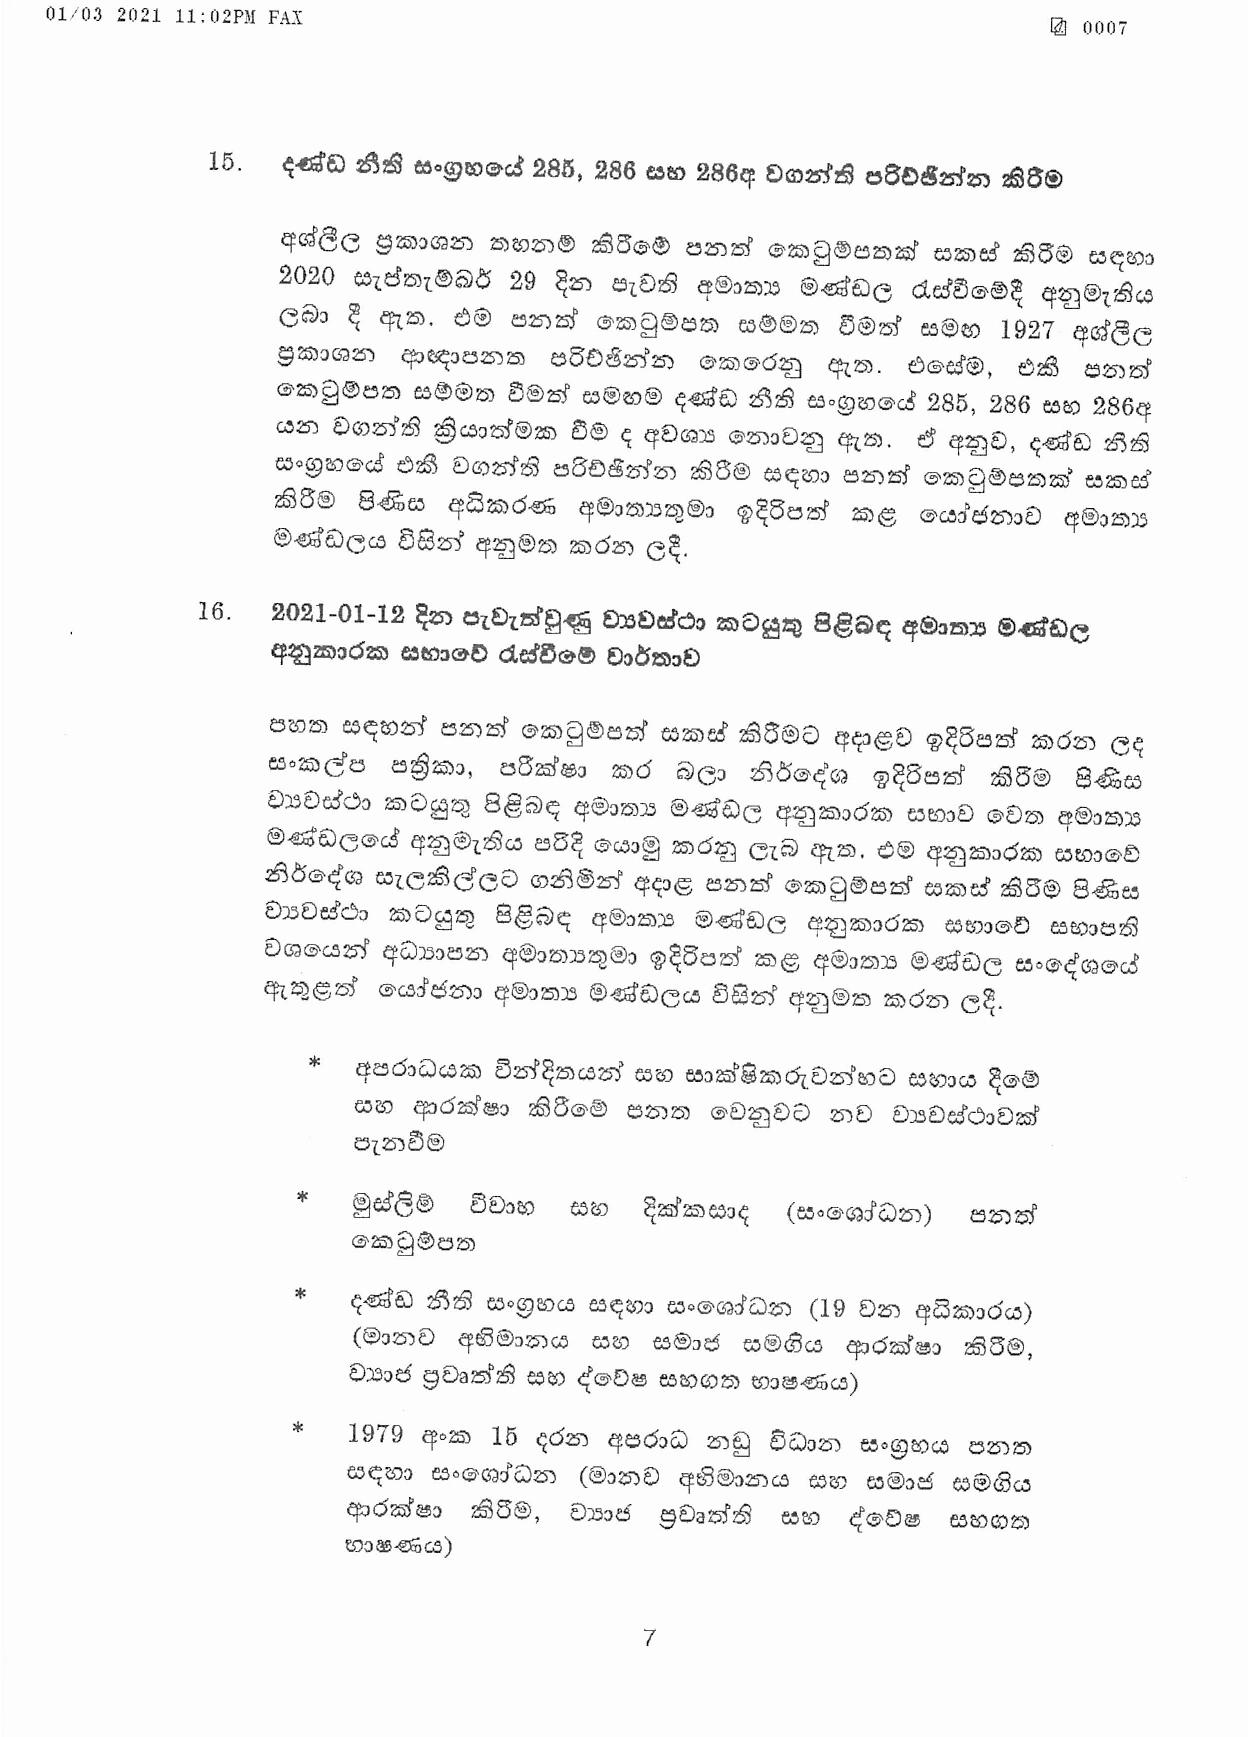 Cabinet Decision on 01.03.2021 page 007